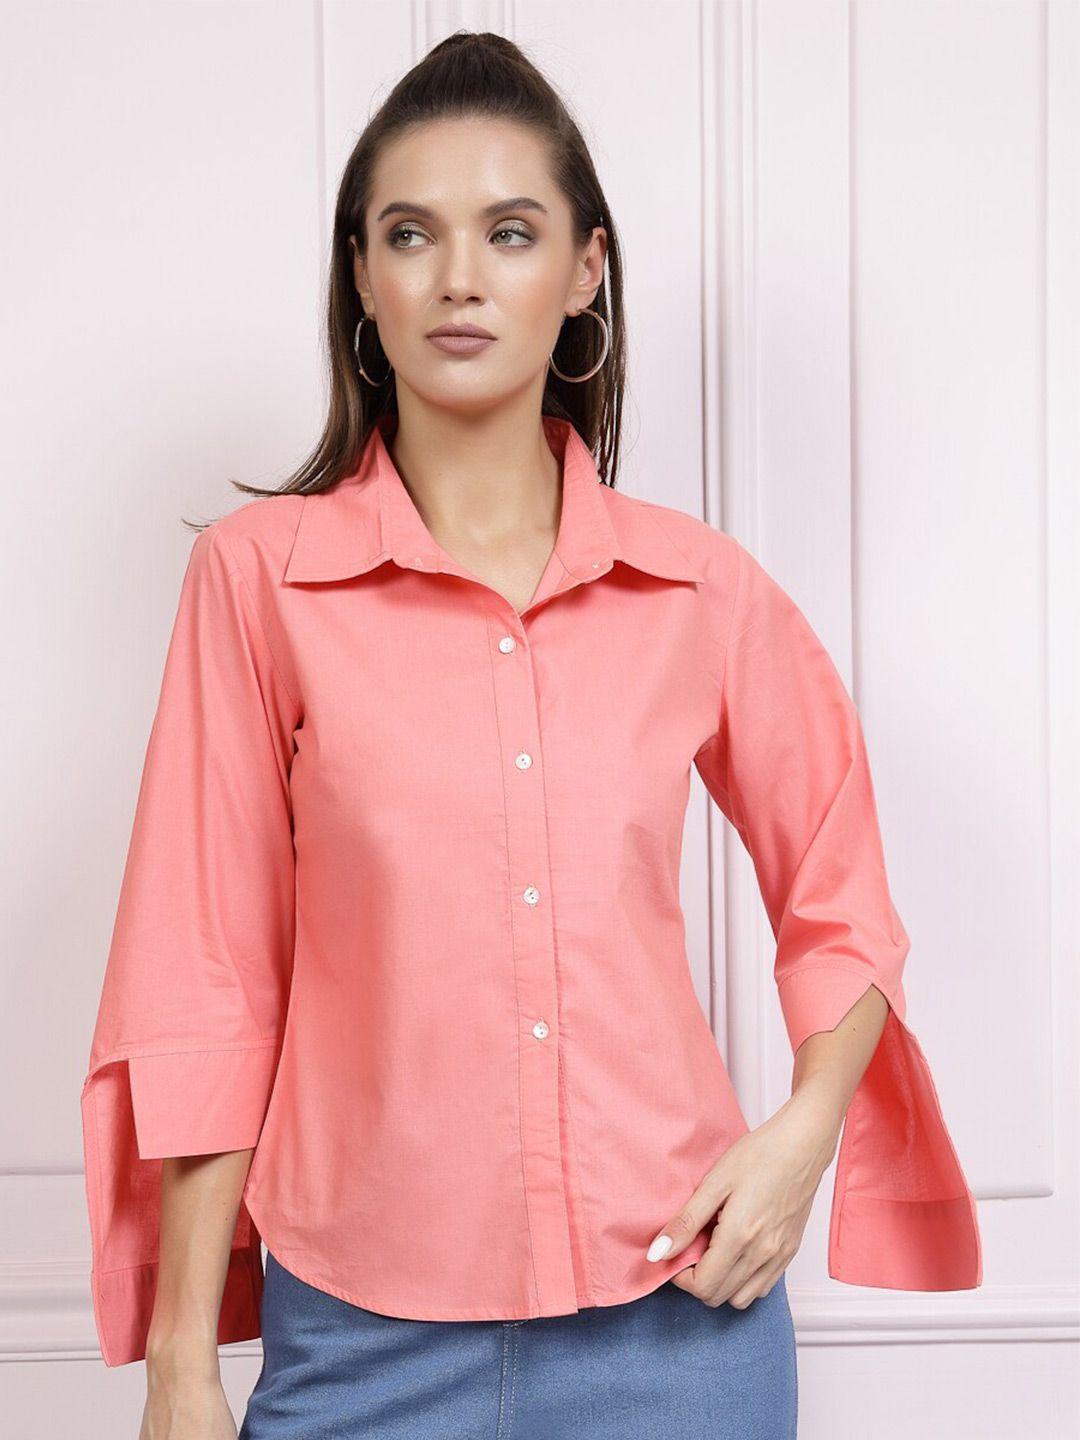 athena high low cuffed sleeves cotton shirt style top